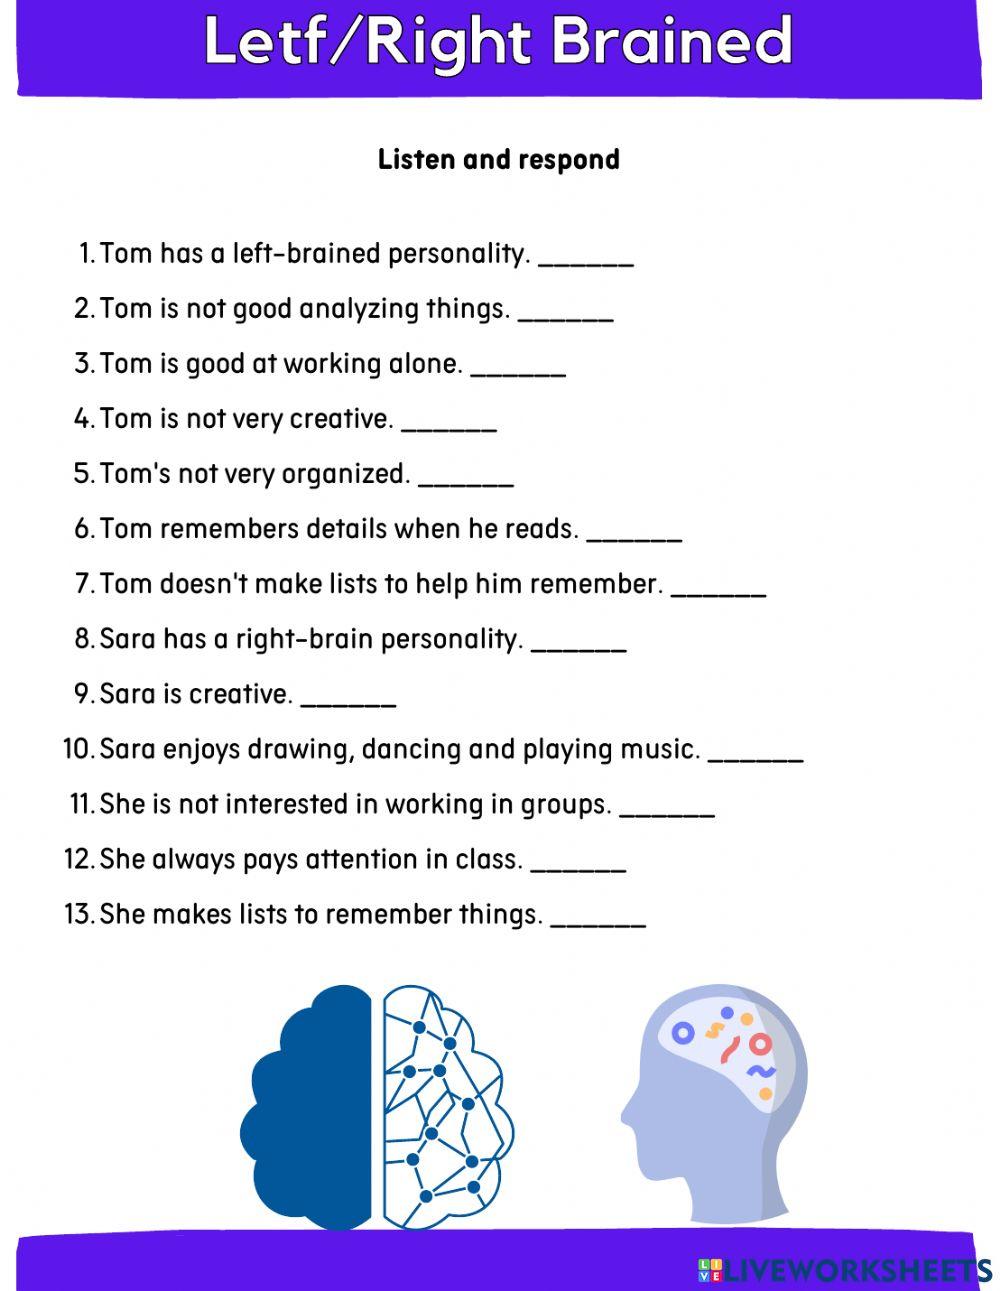 Left brained or Right brained? - Big English 5 Unit 1 Listening